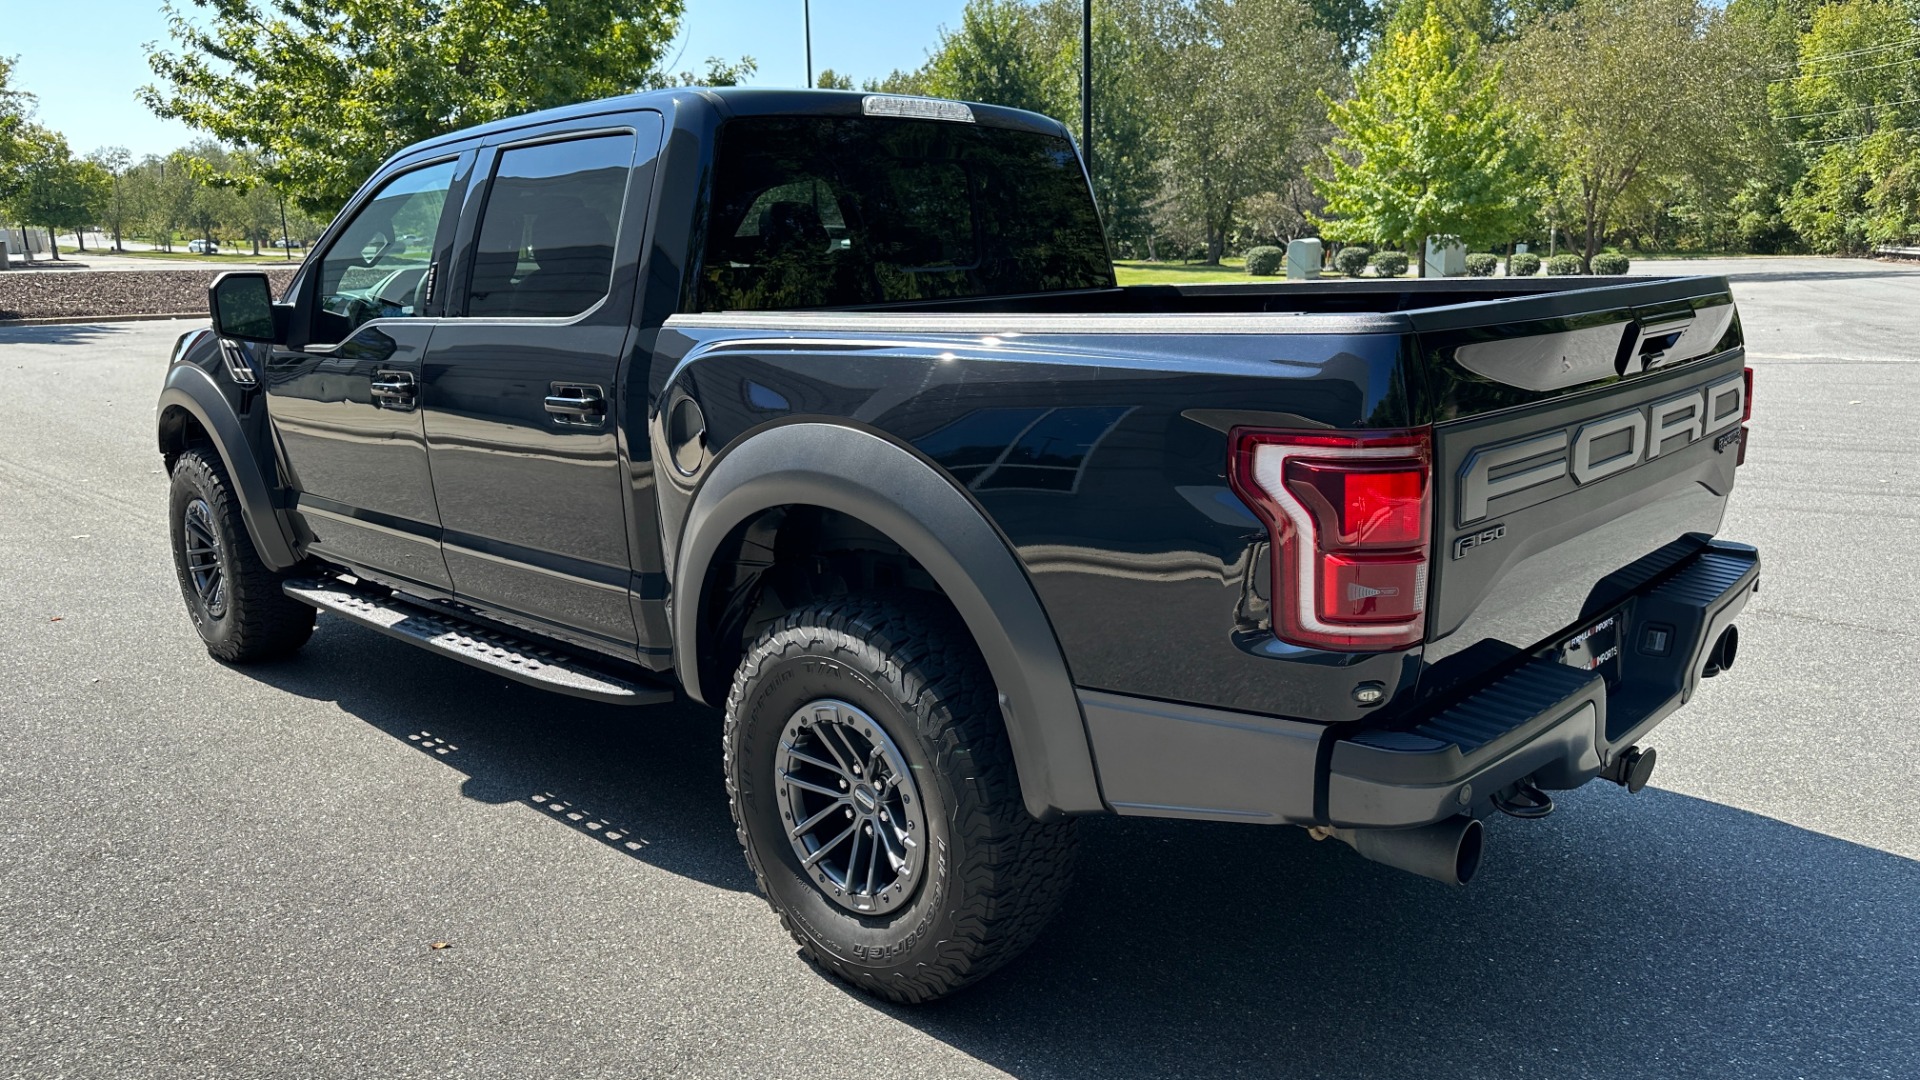 Used 2019 Ford F-150 RAPTOR / CARBON PKG / PANO ROOF / TECH PKG / 17IN FORGED WHEELS for sale $58,900 at Formula Imports in Charlotte NC 28227 7